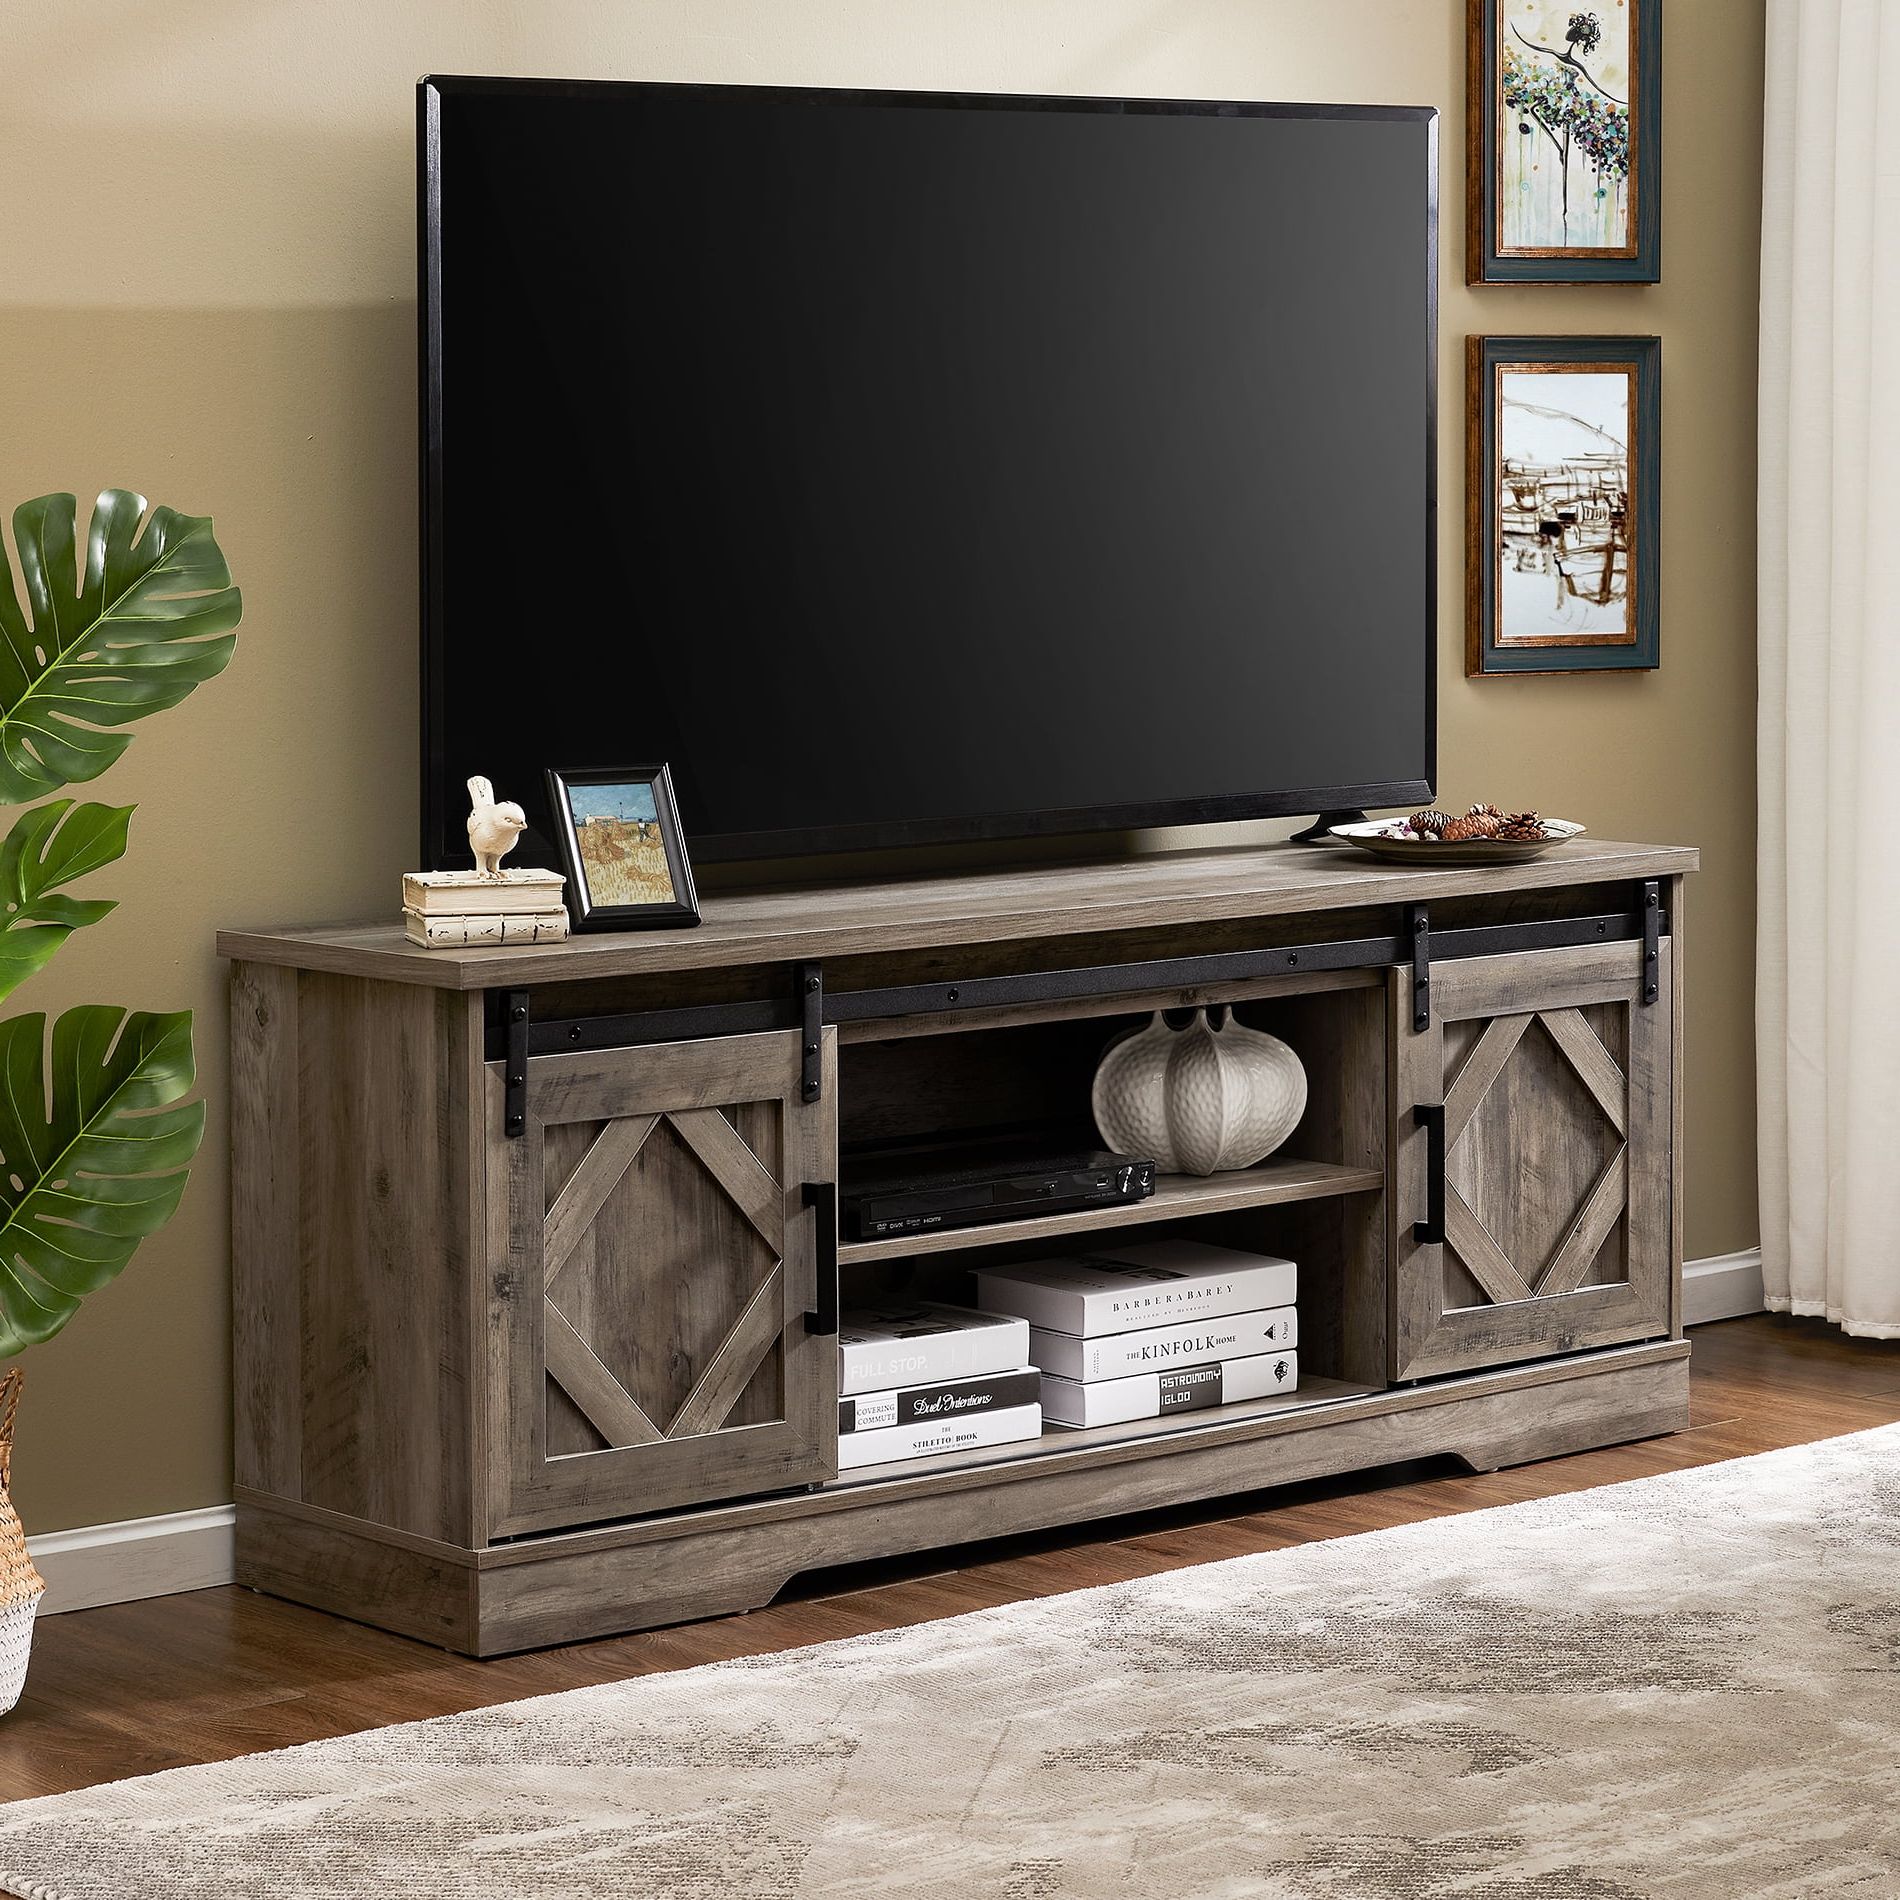 2019 Buy Wampat Farmhouse Tv Stand For Tv Up To 70 Barn Door Media Console Throughout Barn Door Media Tv Stands (Photo 5 of 15)